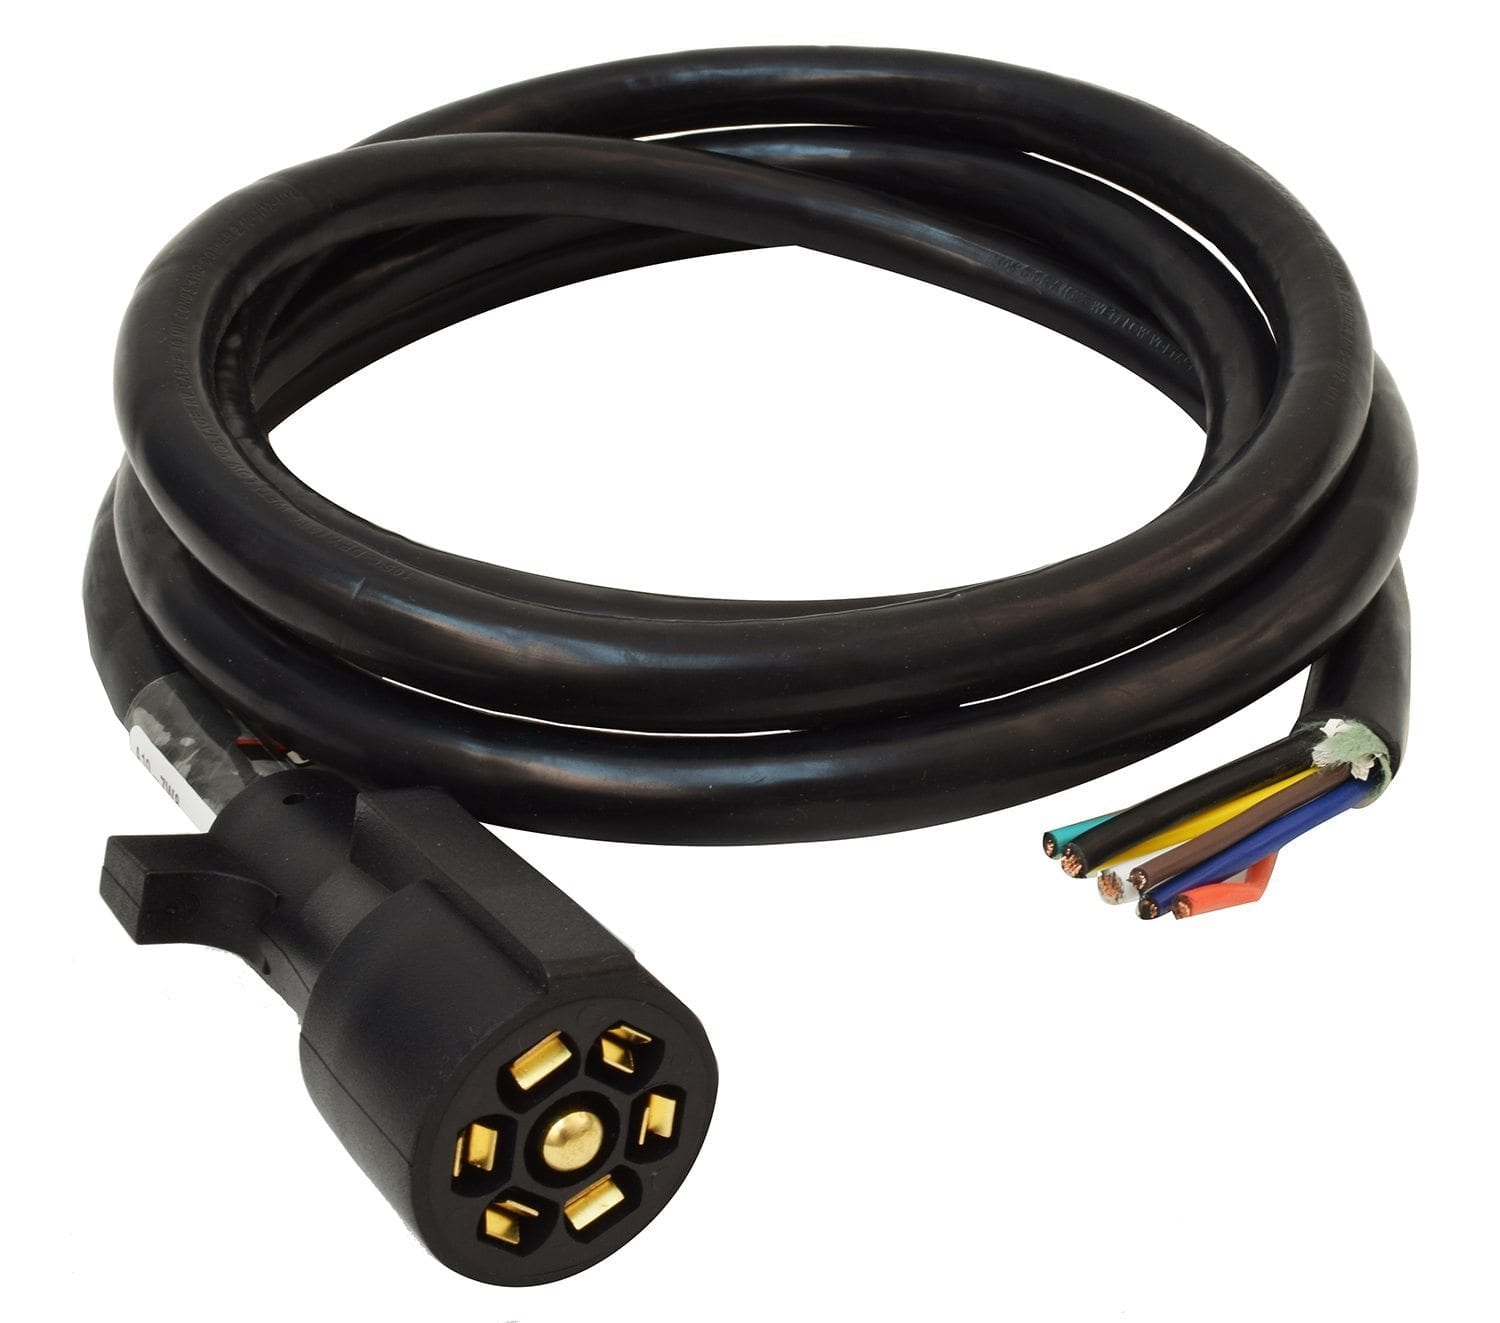 Mighty Cord TC79837 7-Way Both End Extension Cord